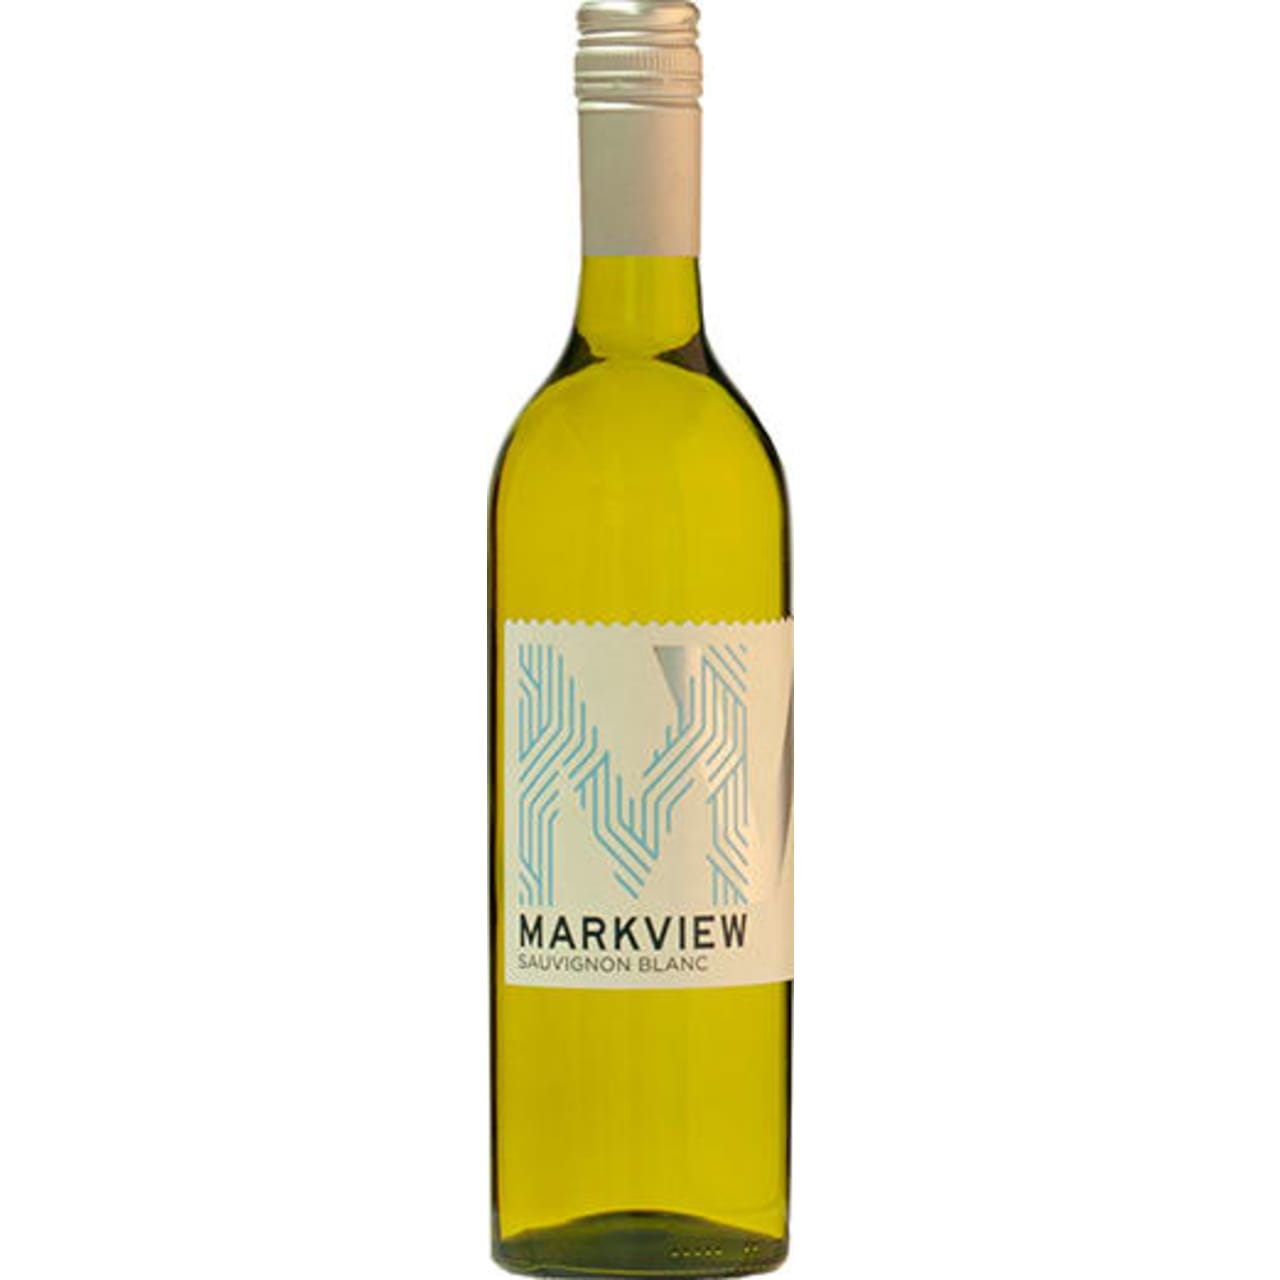 Fresh, grassy Australian Sauvignon Blanc, the aroma of fresh-cut lawn pleasingly balanced by tropical notes of pineapple and passion fruit.